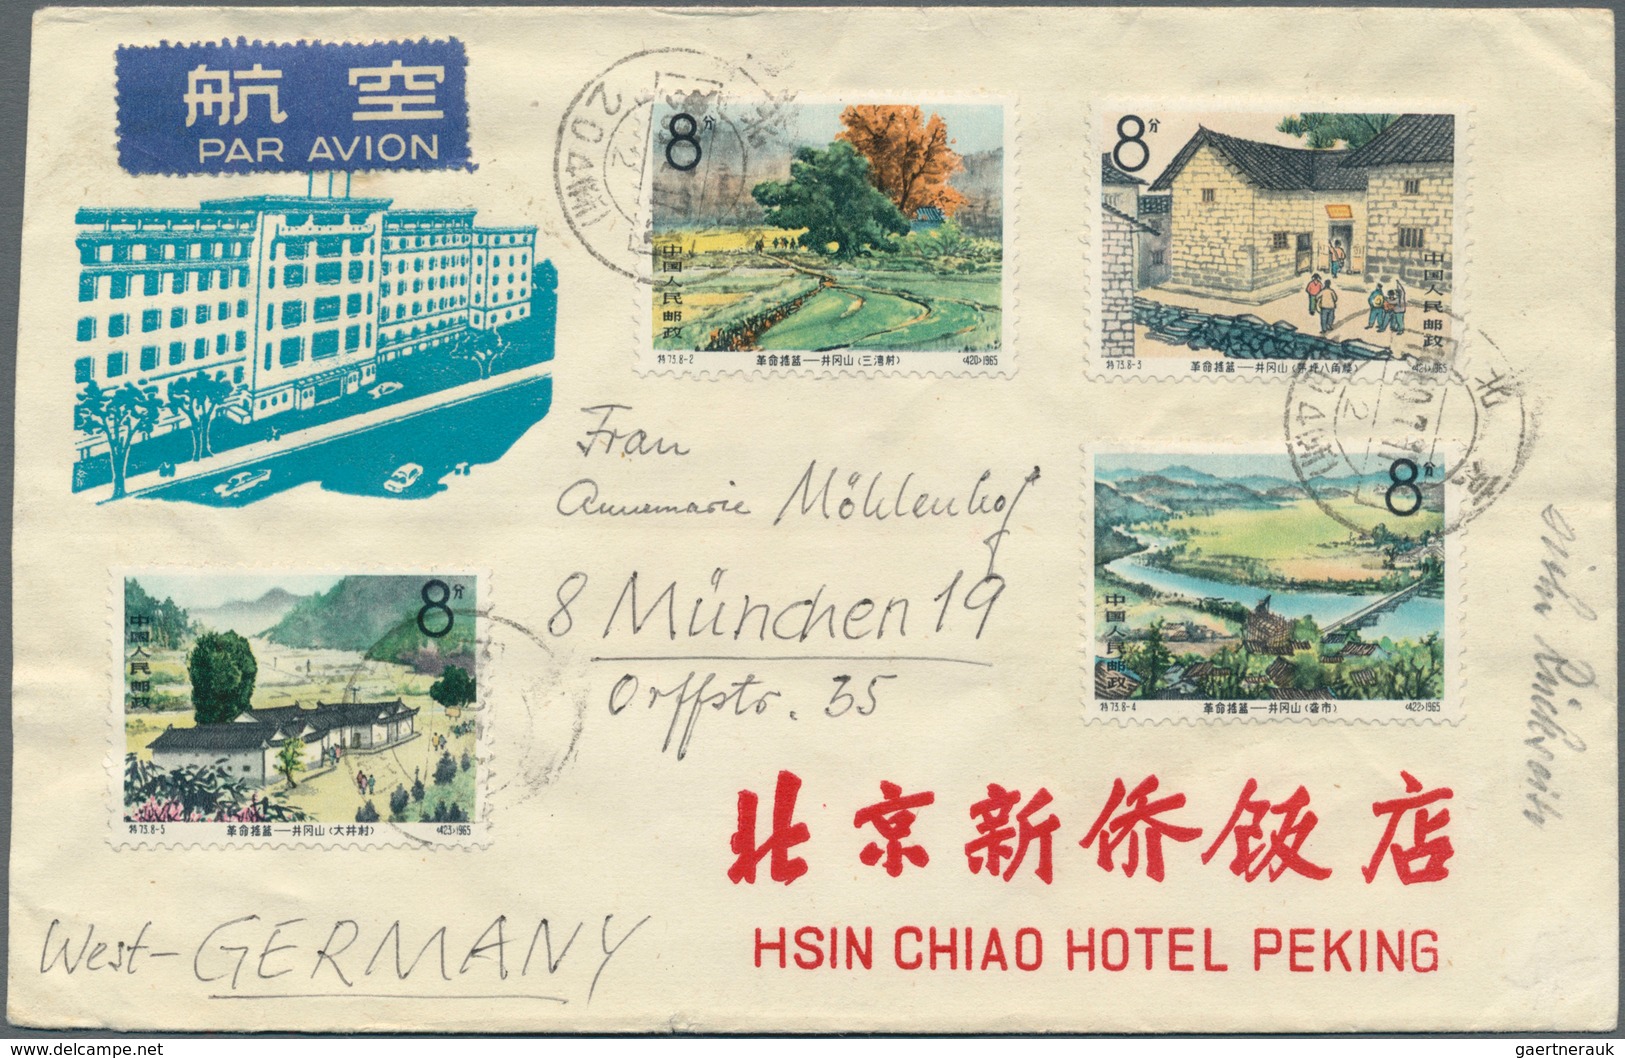 Asien: 1929/90 (ca.), apprx. 194 covers and stationery (inc. uprates) in two cover albums, inc. Chin